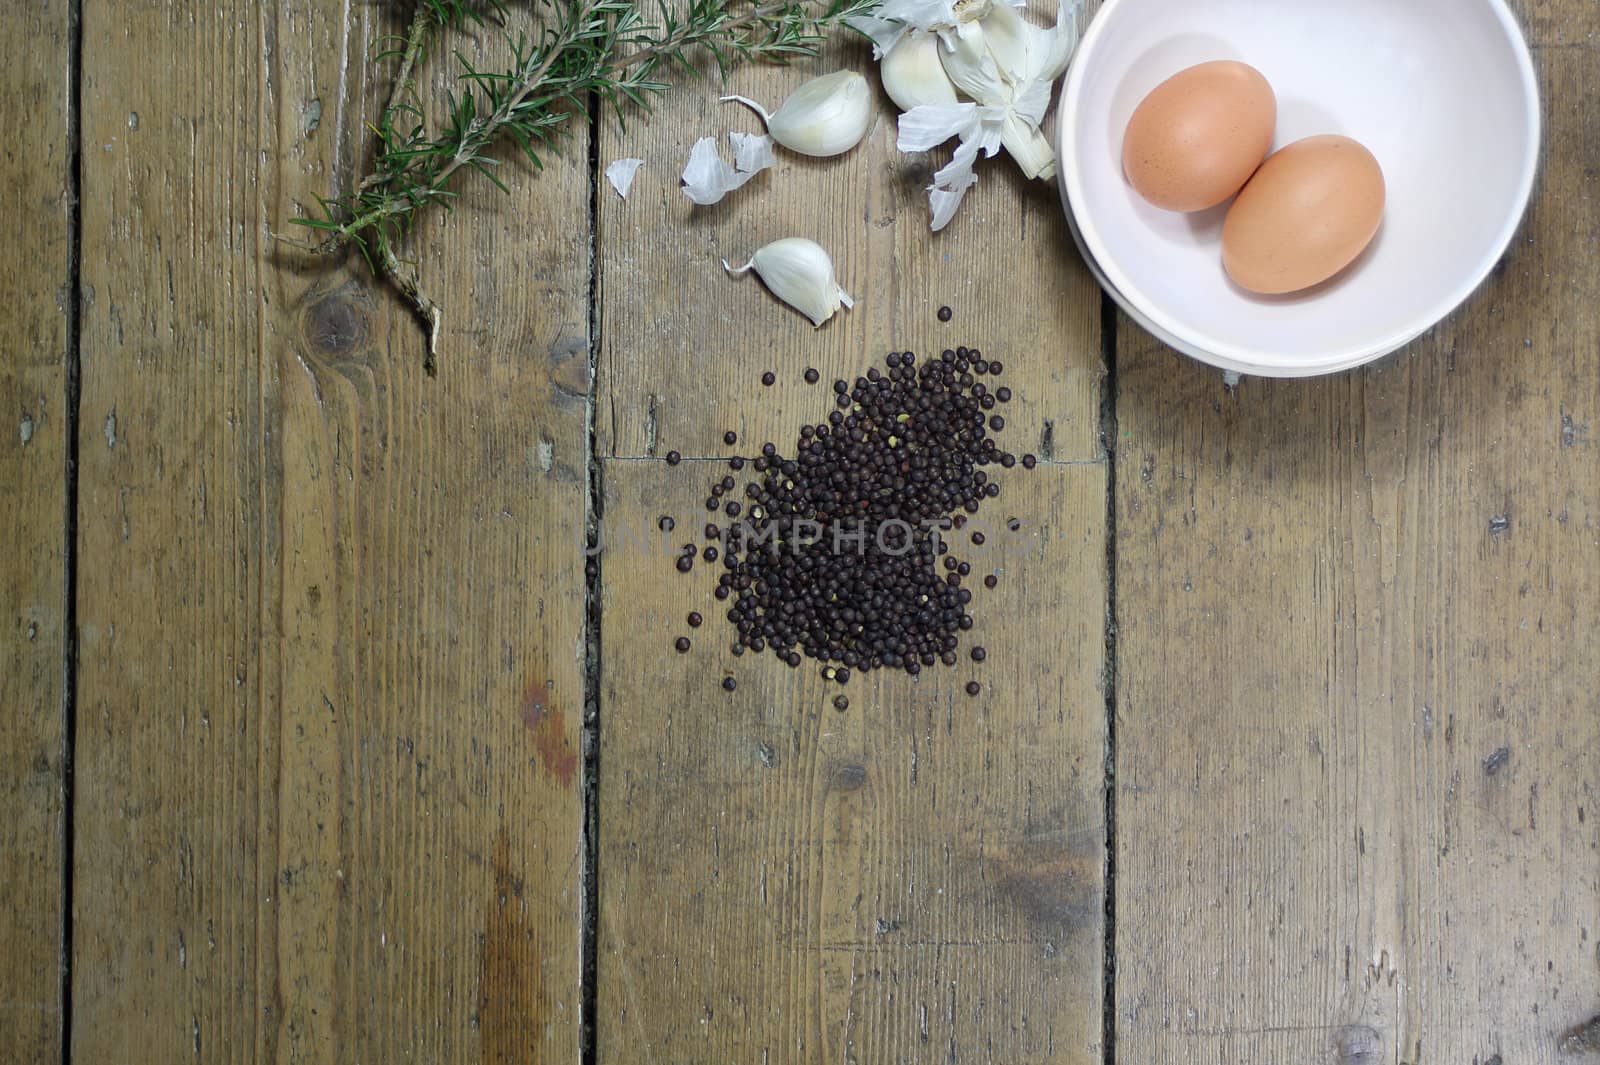 Kitchen ingredients comprising of brown eggs, garlic, fresh rosemary and black lentils. All set on a landscape format against a wooden background with plenty of copy-space available.